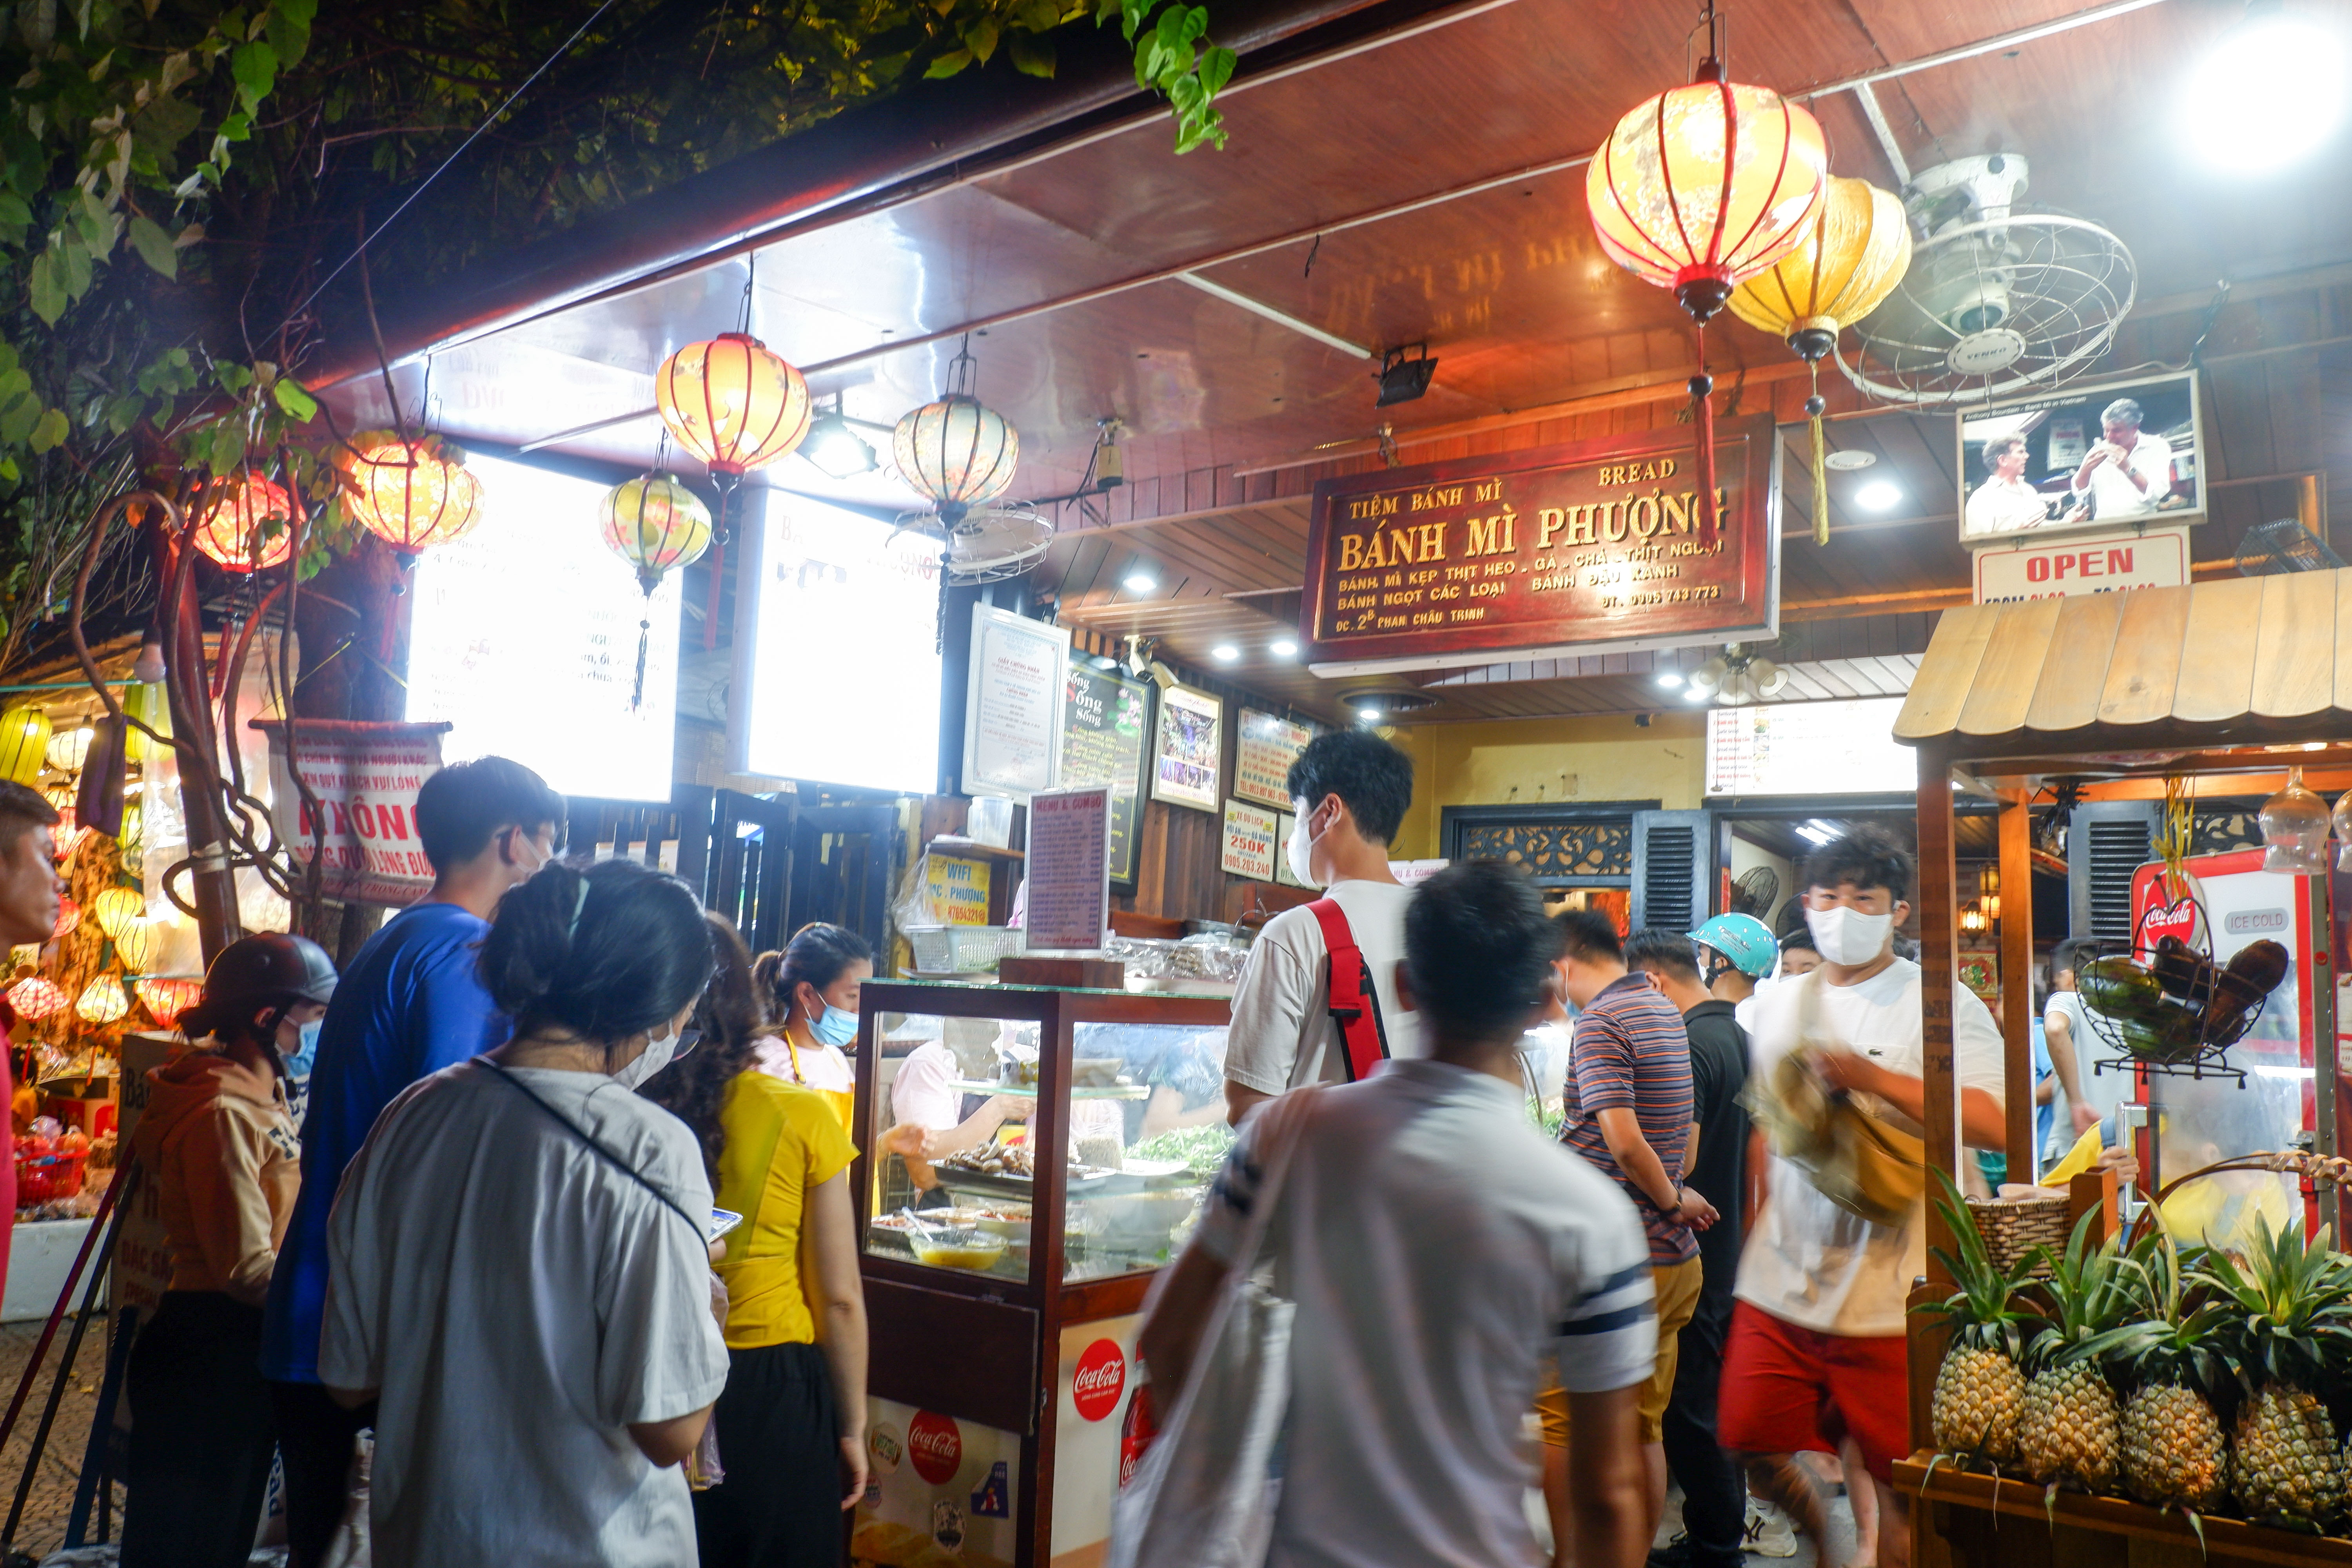 The famous Banh Mi Phuong stall in Hoi An